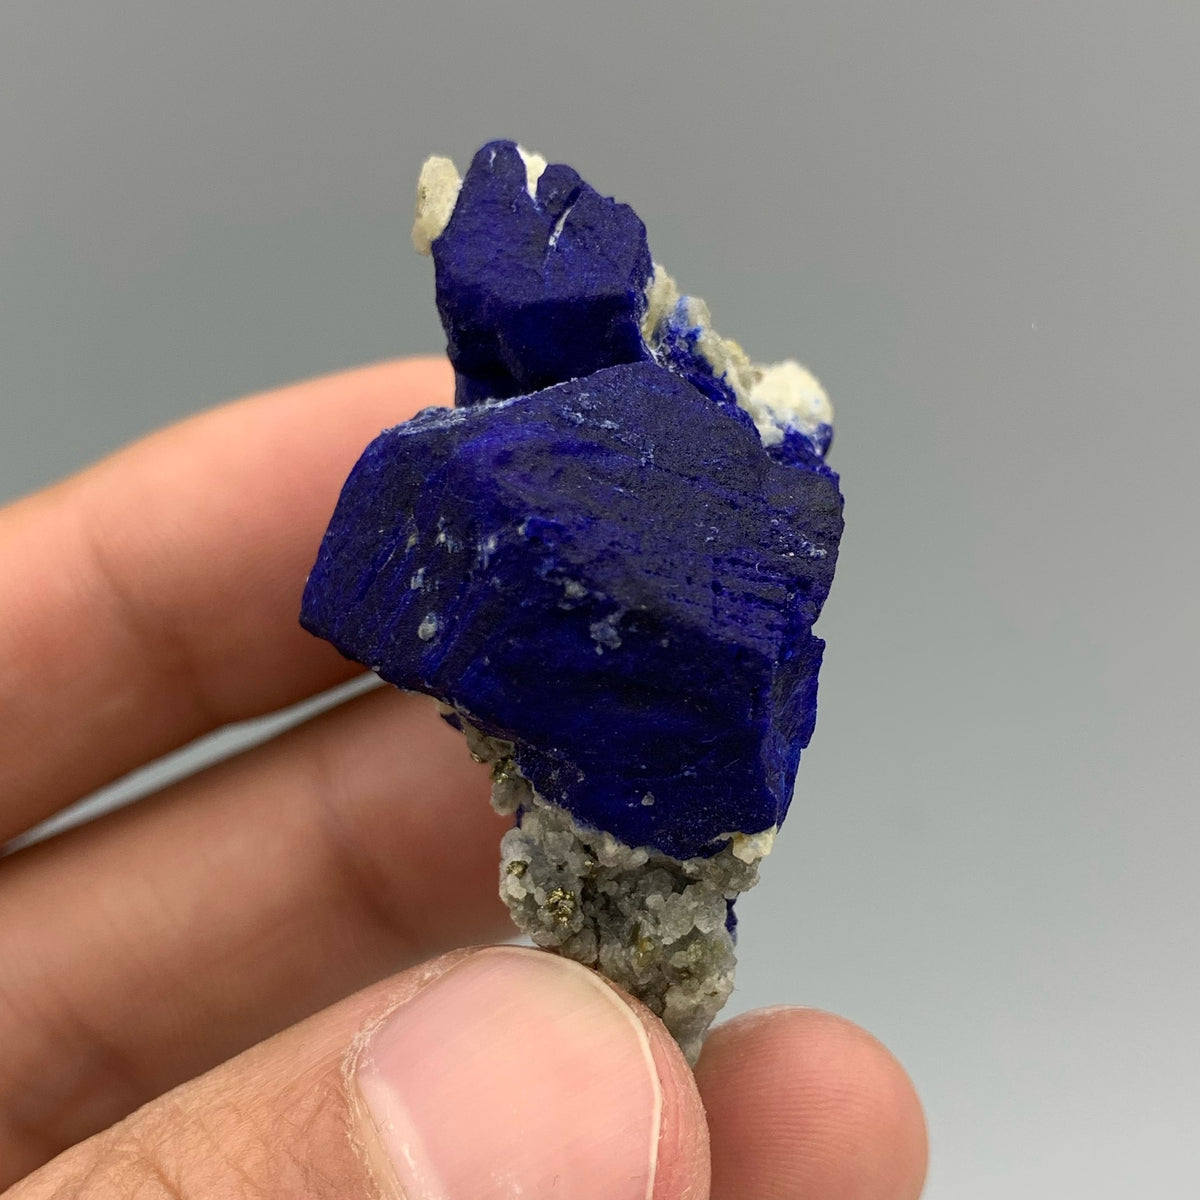 Azure Blue Lazurite Crystals With Pyrite On Albite